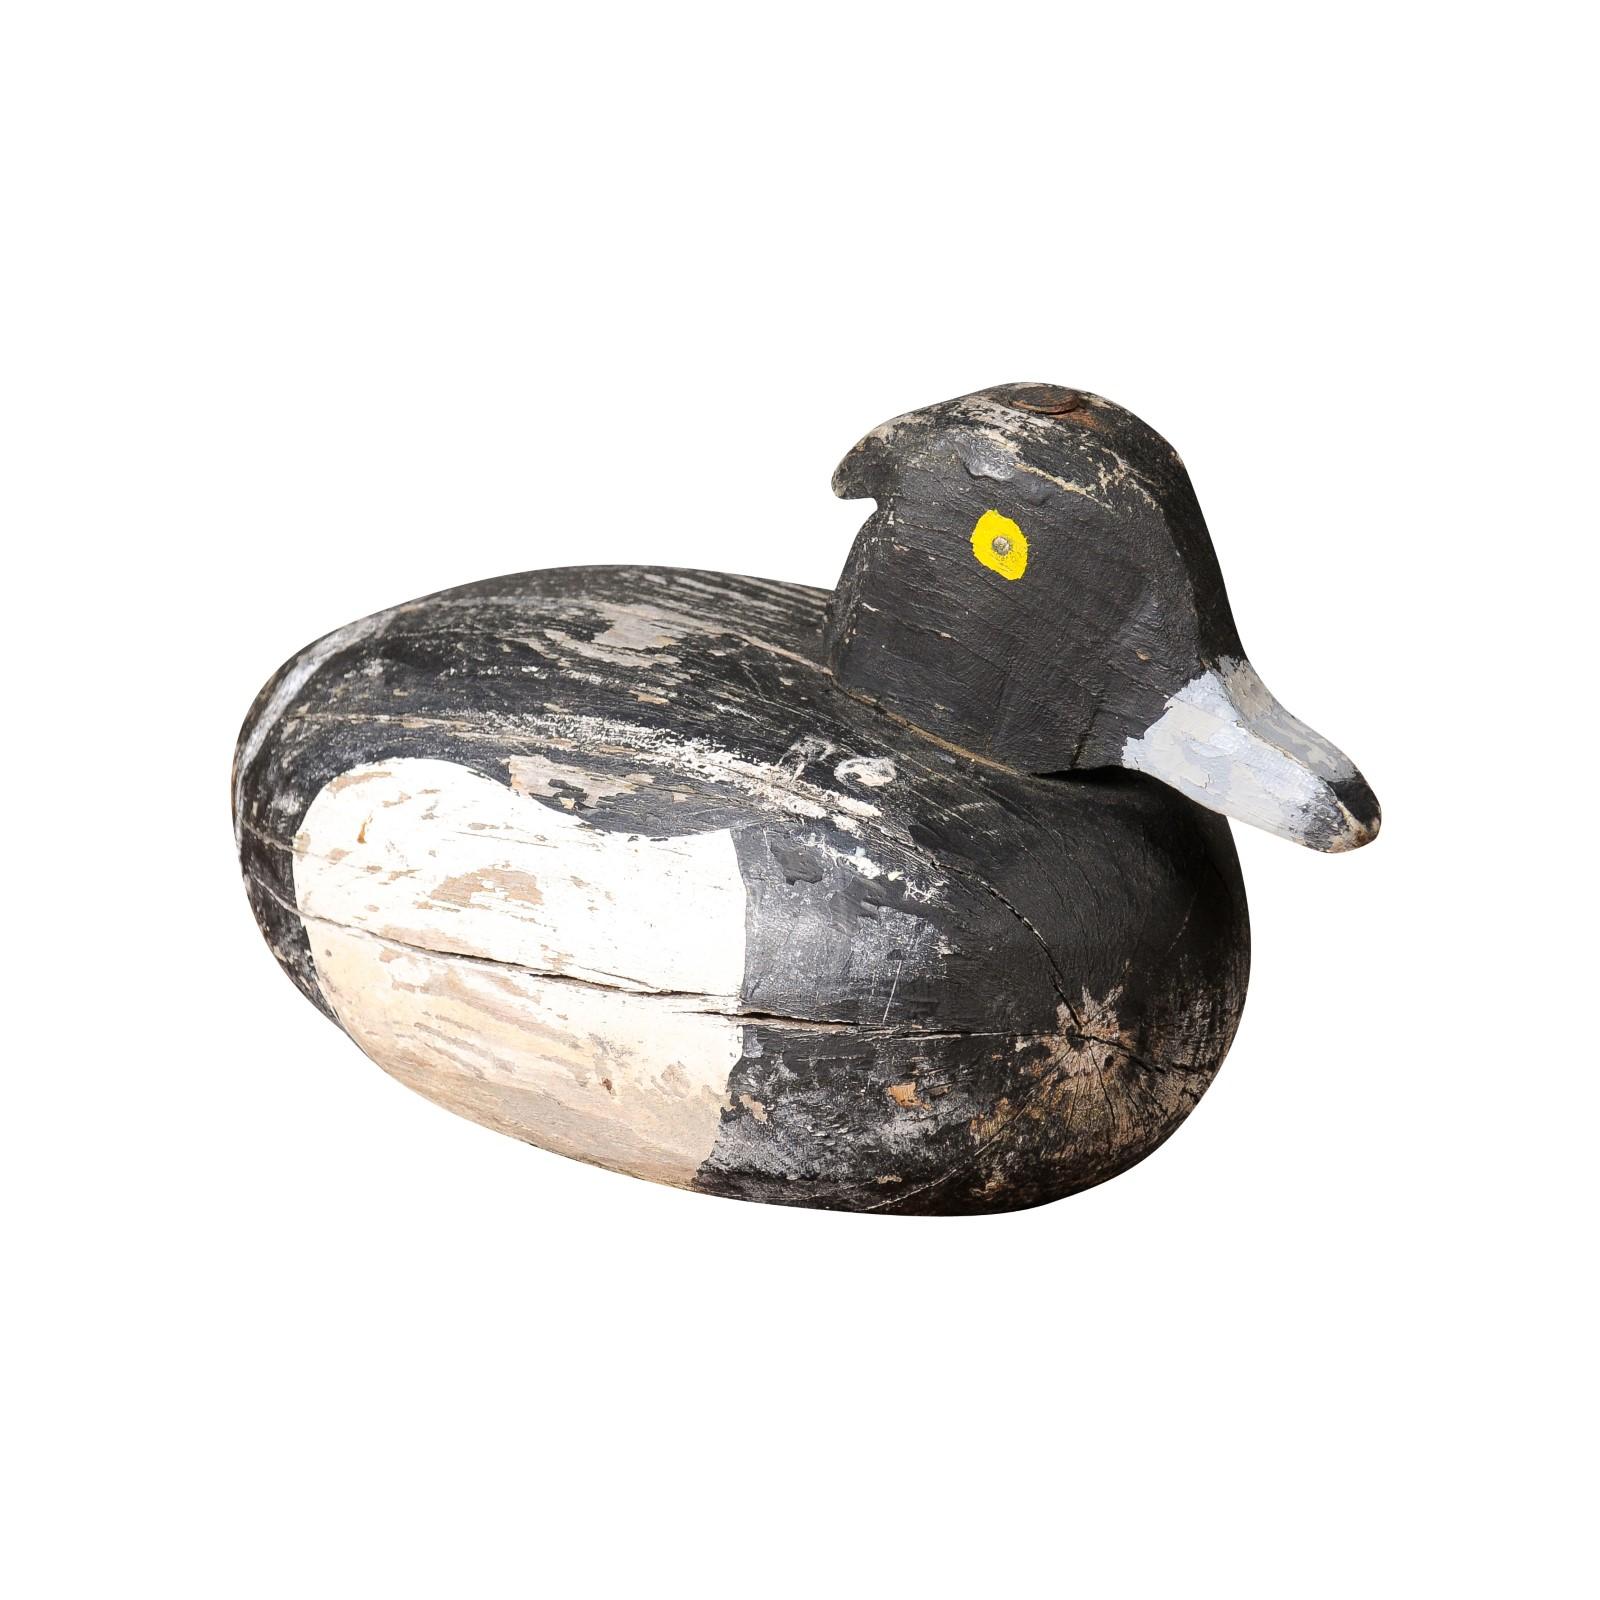 A French carved wooden duck from the 20th century with rustic appearance, white, black and yellow paint. Envelop your space with an air of tranquility and pastoral bliss with this delightful French carved wooden duck from the 20th century. A